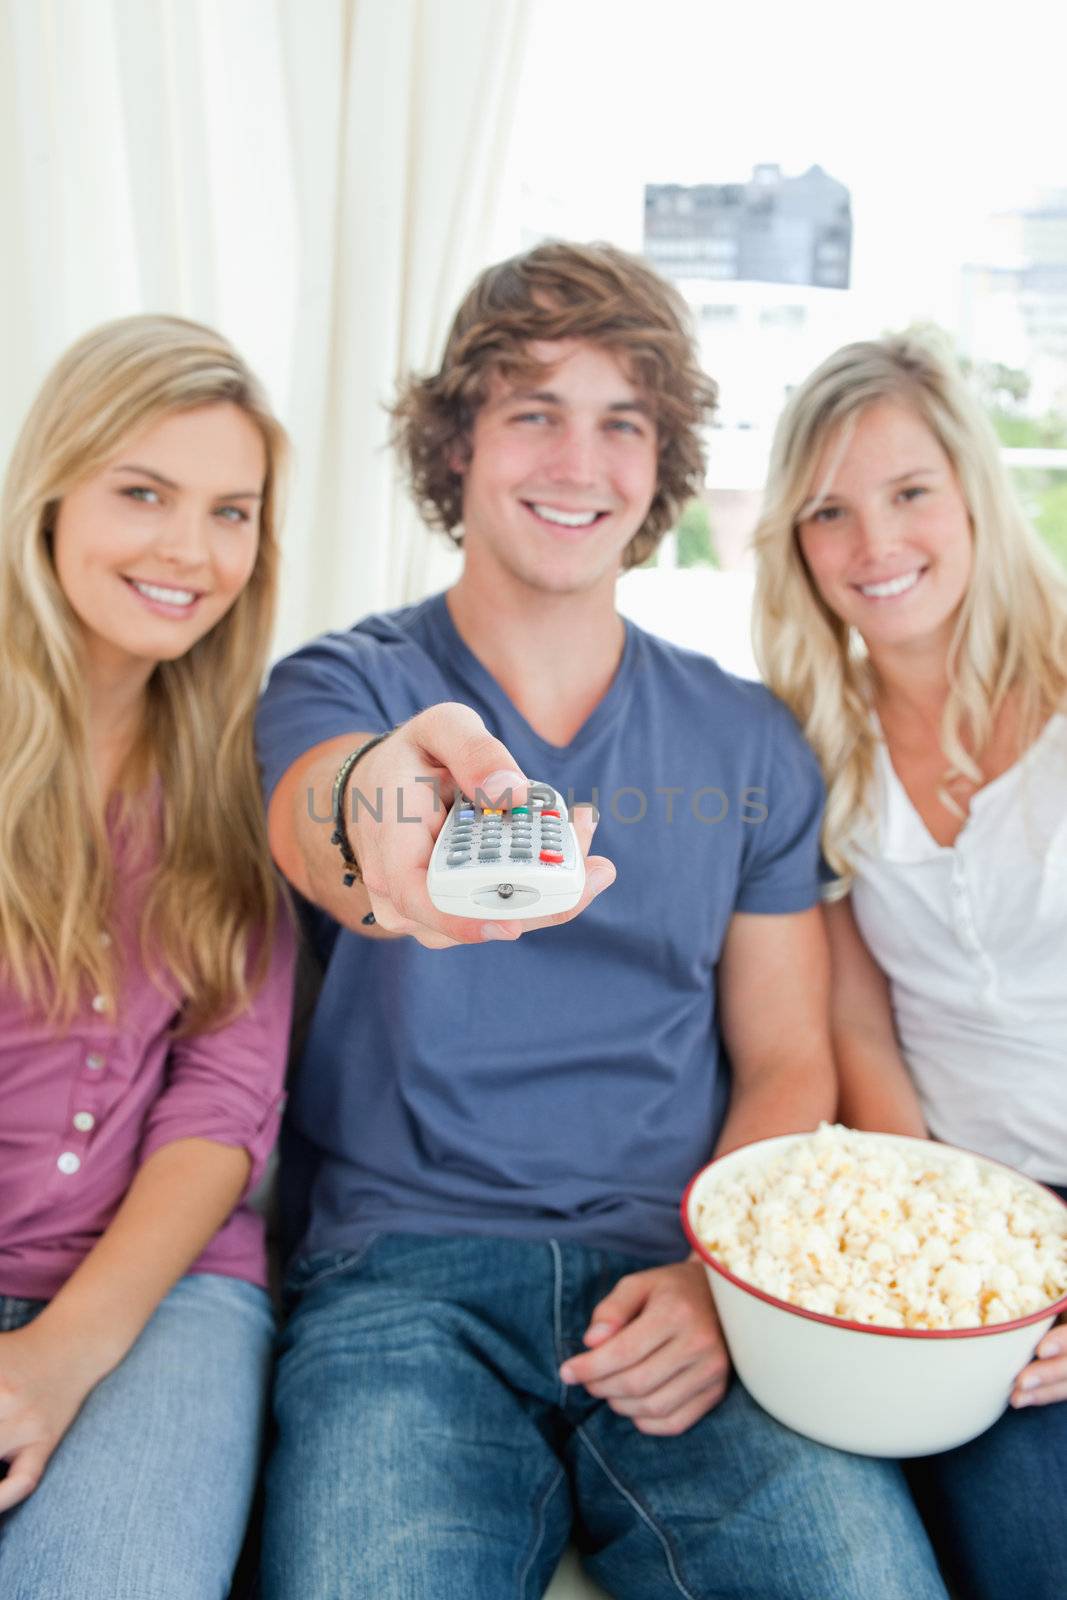 A focused shot on the tv remote as the people eating popcorn are about to use it